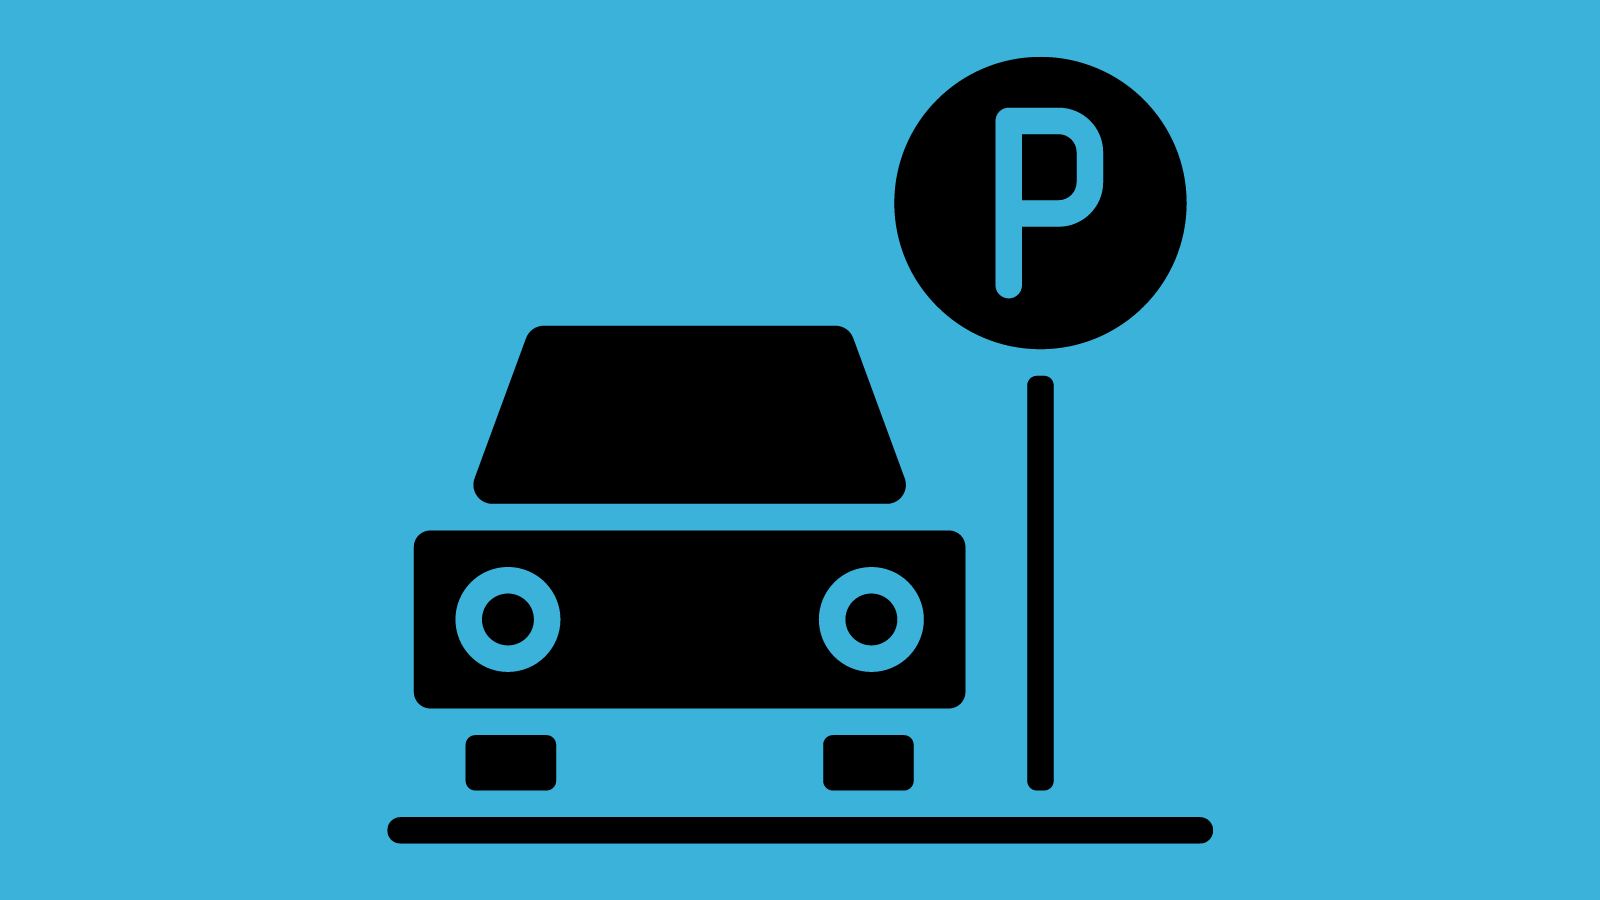 Minimalist icon of a car in a parking spot